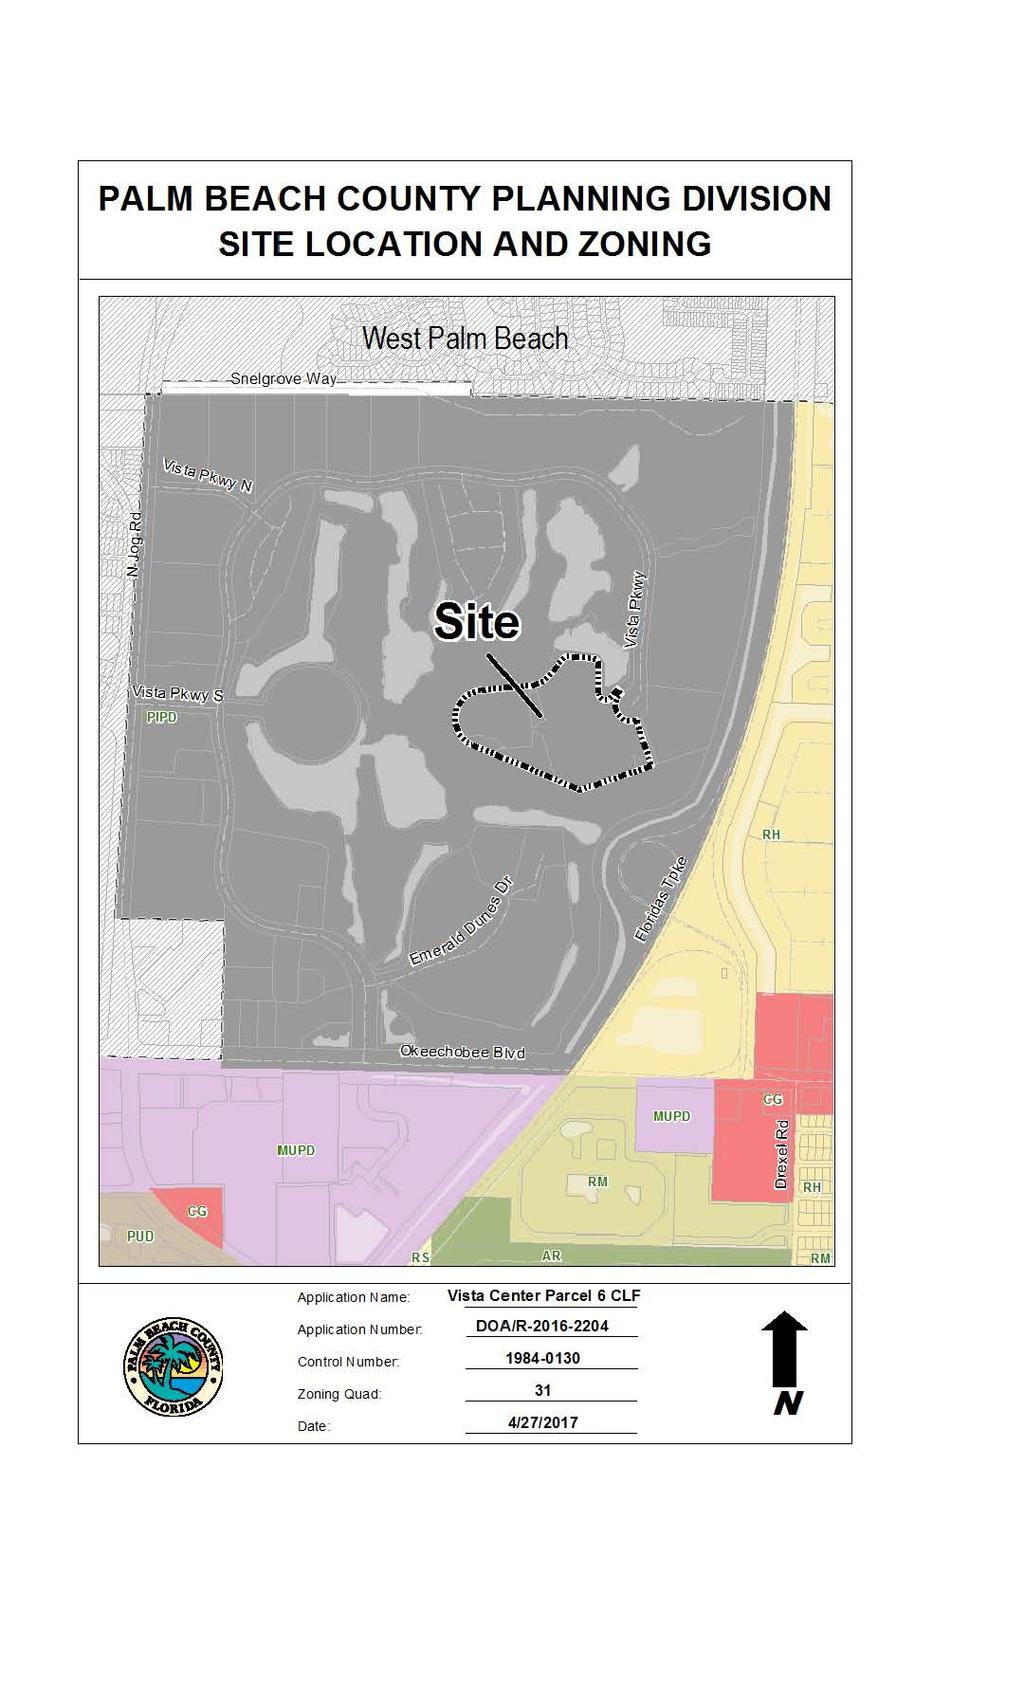 Figure 2 Zoning Map PALM BEACH COUNTY PLANNING DIVISION SITE LOCATION AND ZONING MUPD,.